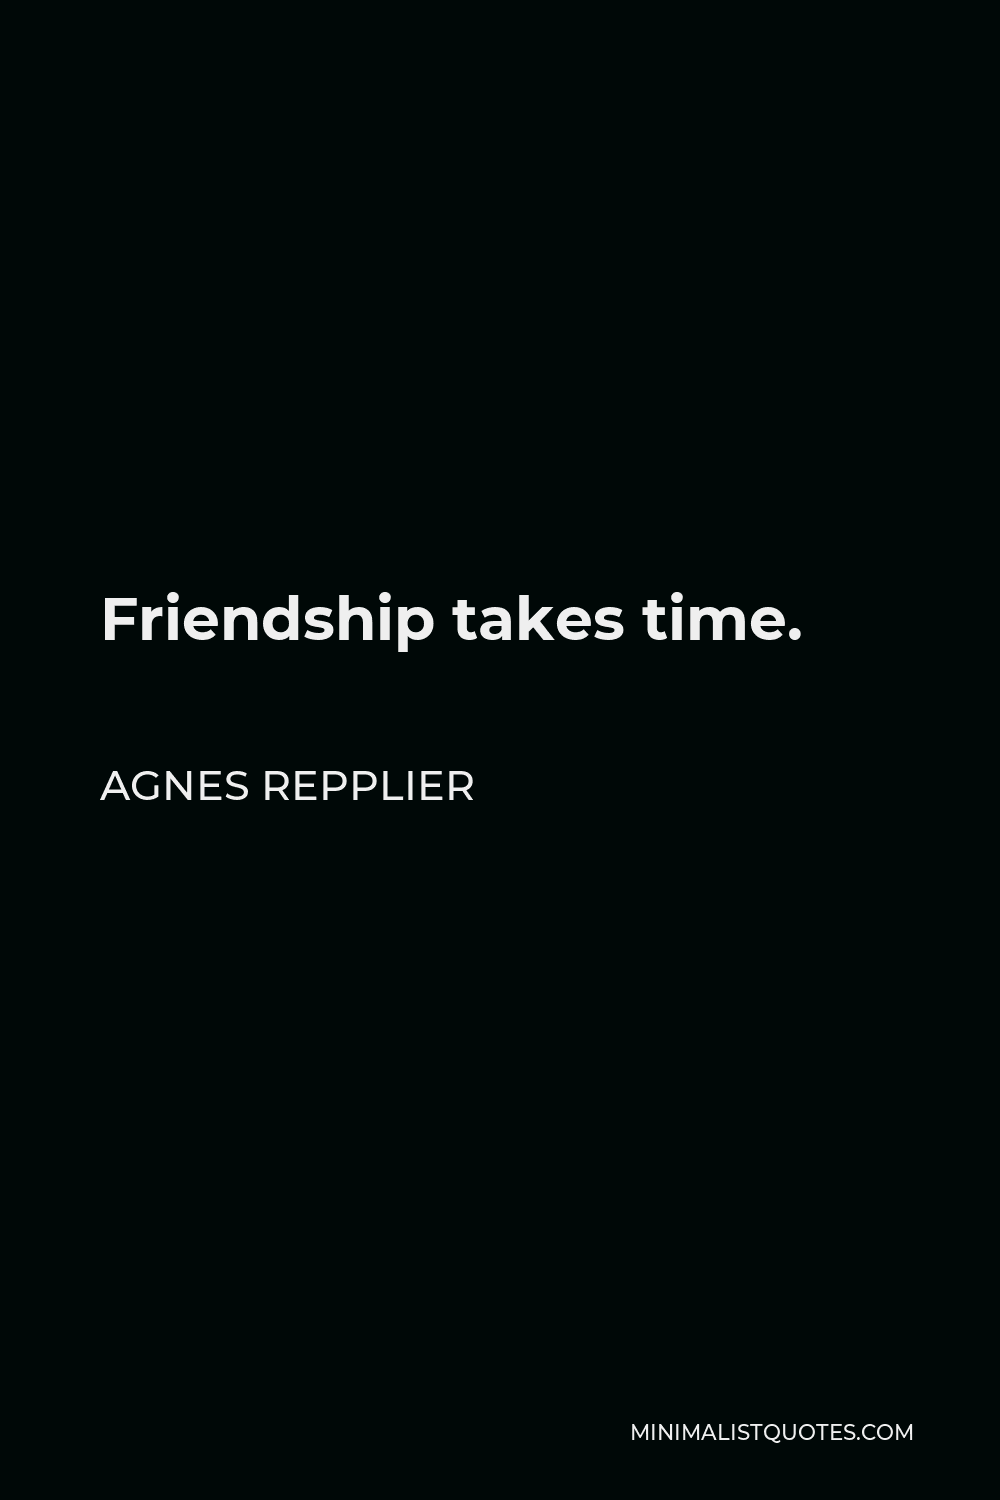 Agnes Repplier Quote - Friendship takes time.